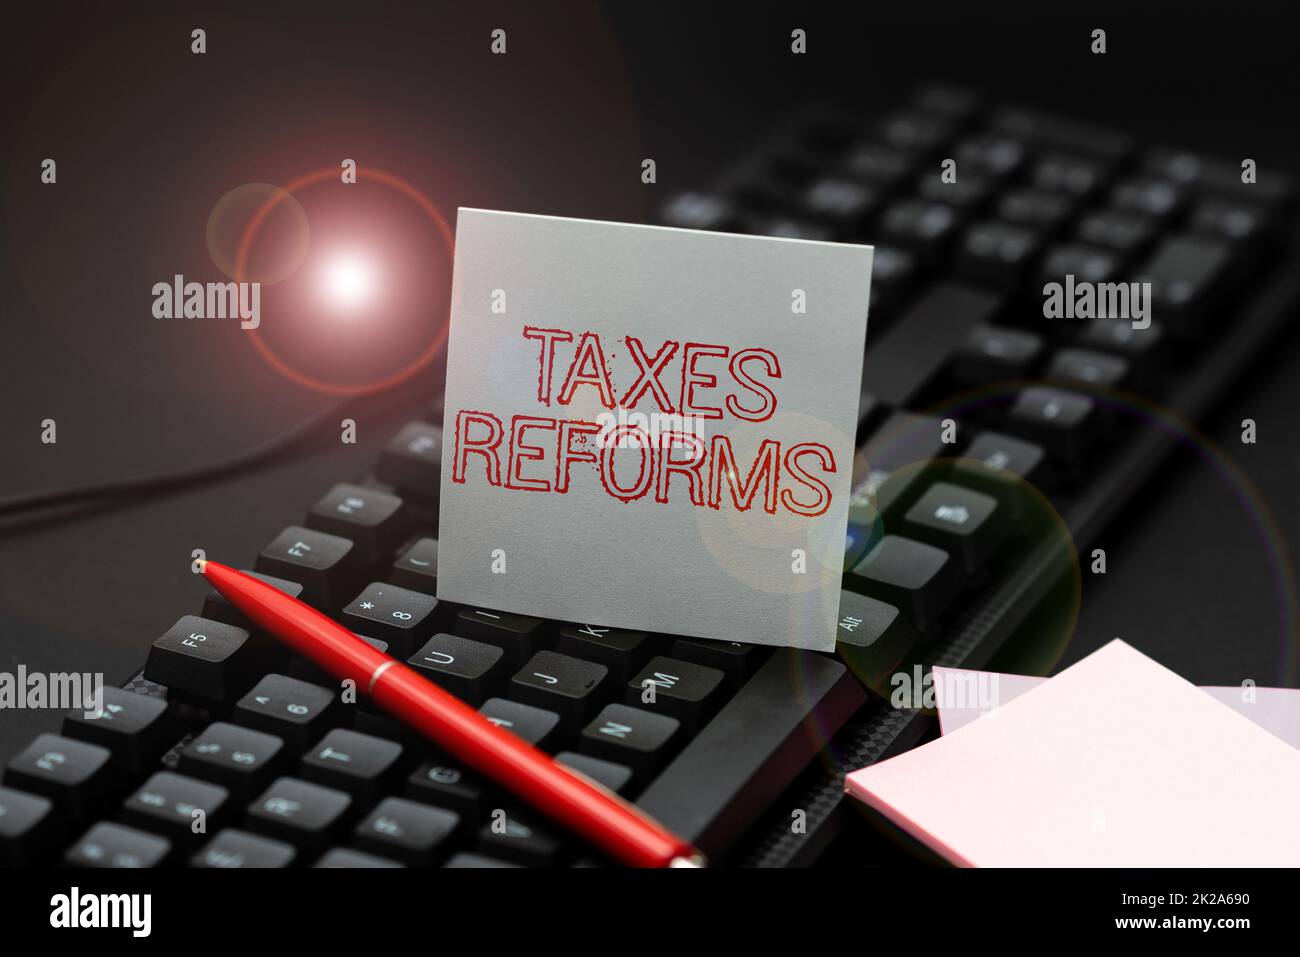 Conceptual display Taxes Reforms. Business overview managing collected taxes in a more efficient process Publishing Typewritten Documents Online, Typing Long Term Contract Stock Photo